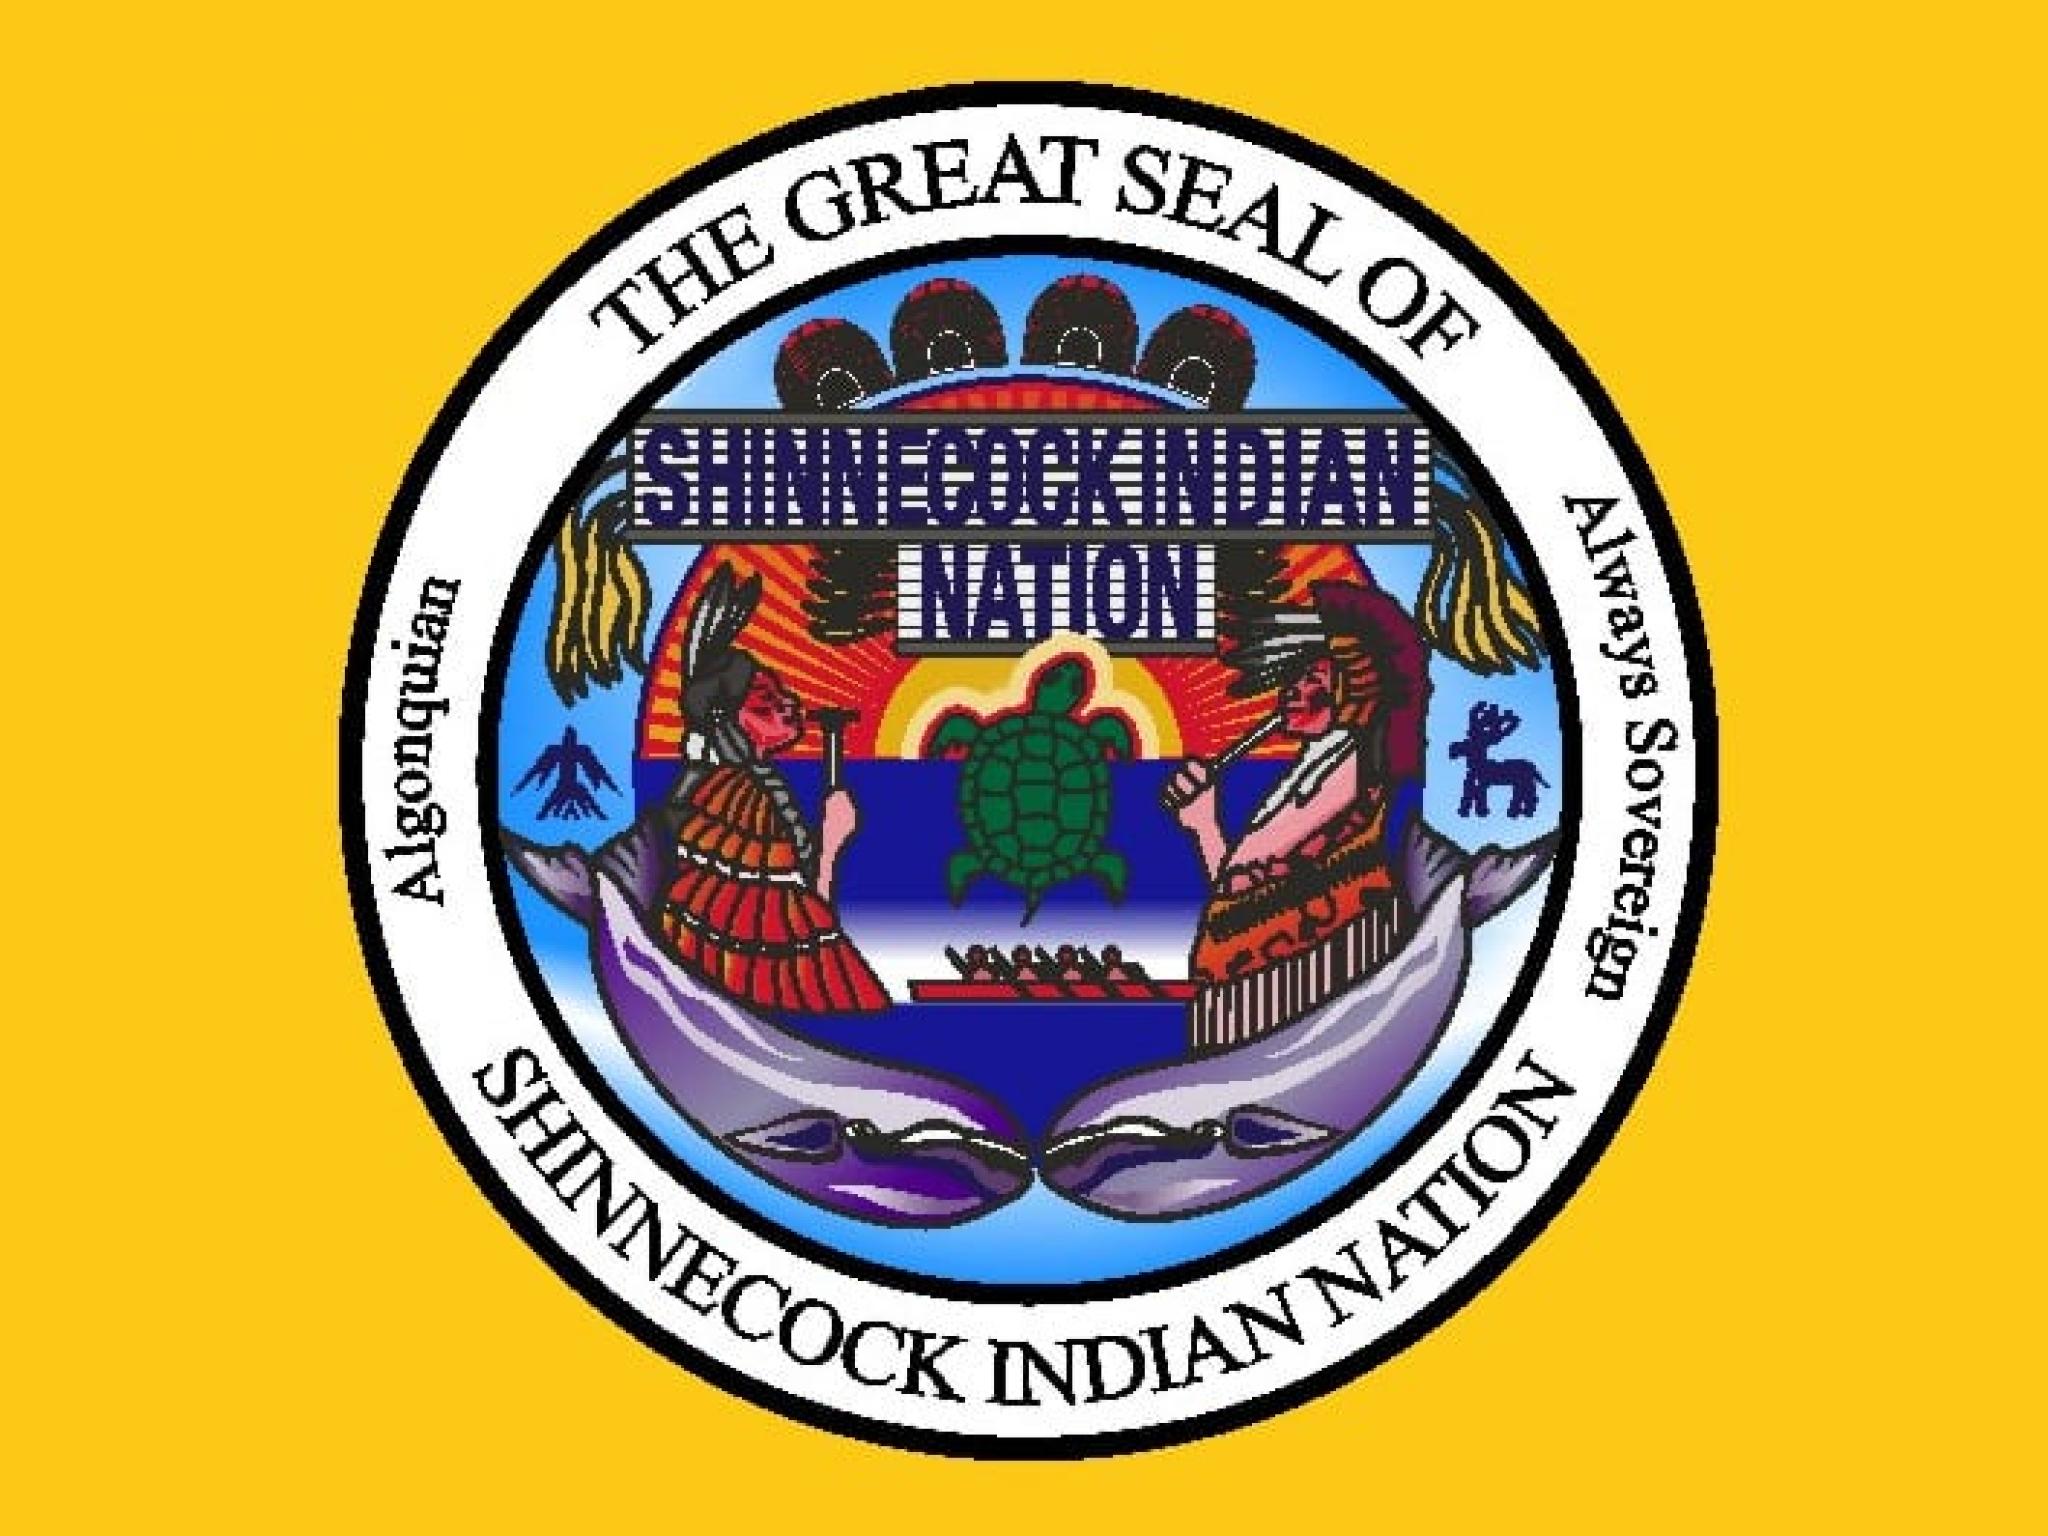  tilt-holdings-and-shinnecock-indian-nation-break-ground-on-historic-tribally-owned-cannabis-enterprise-in-long-island-ny 